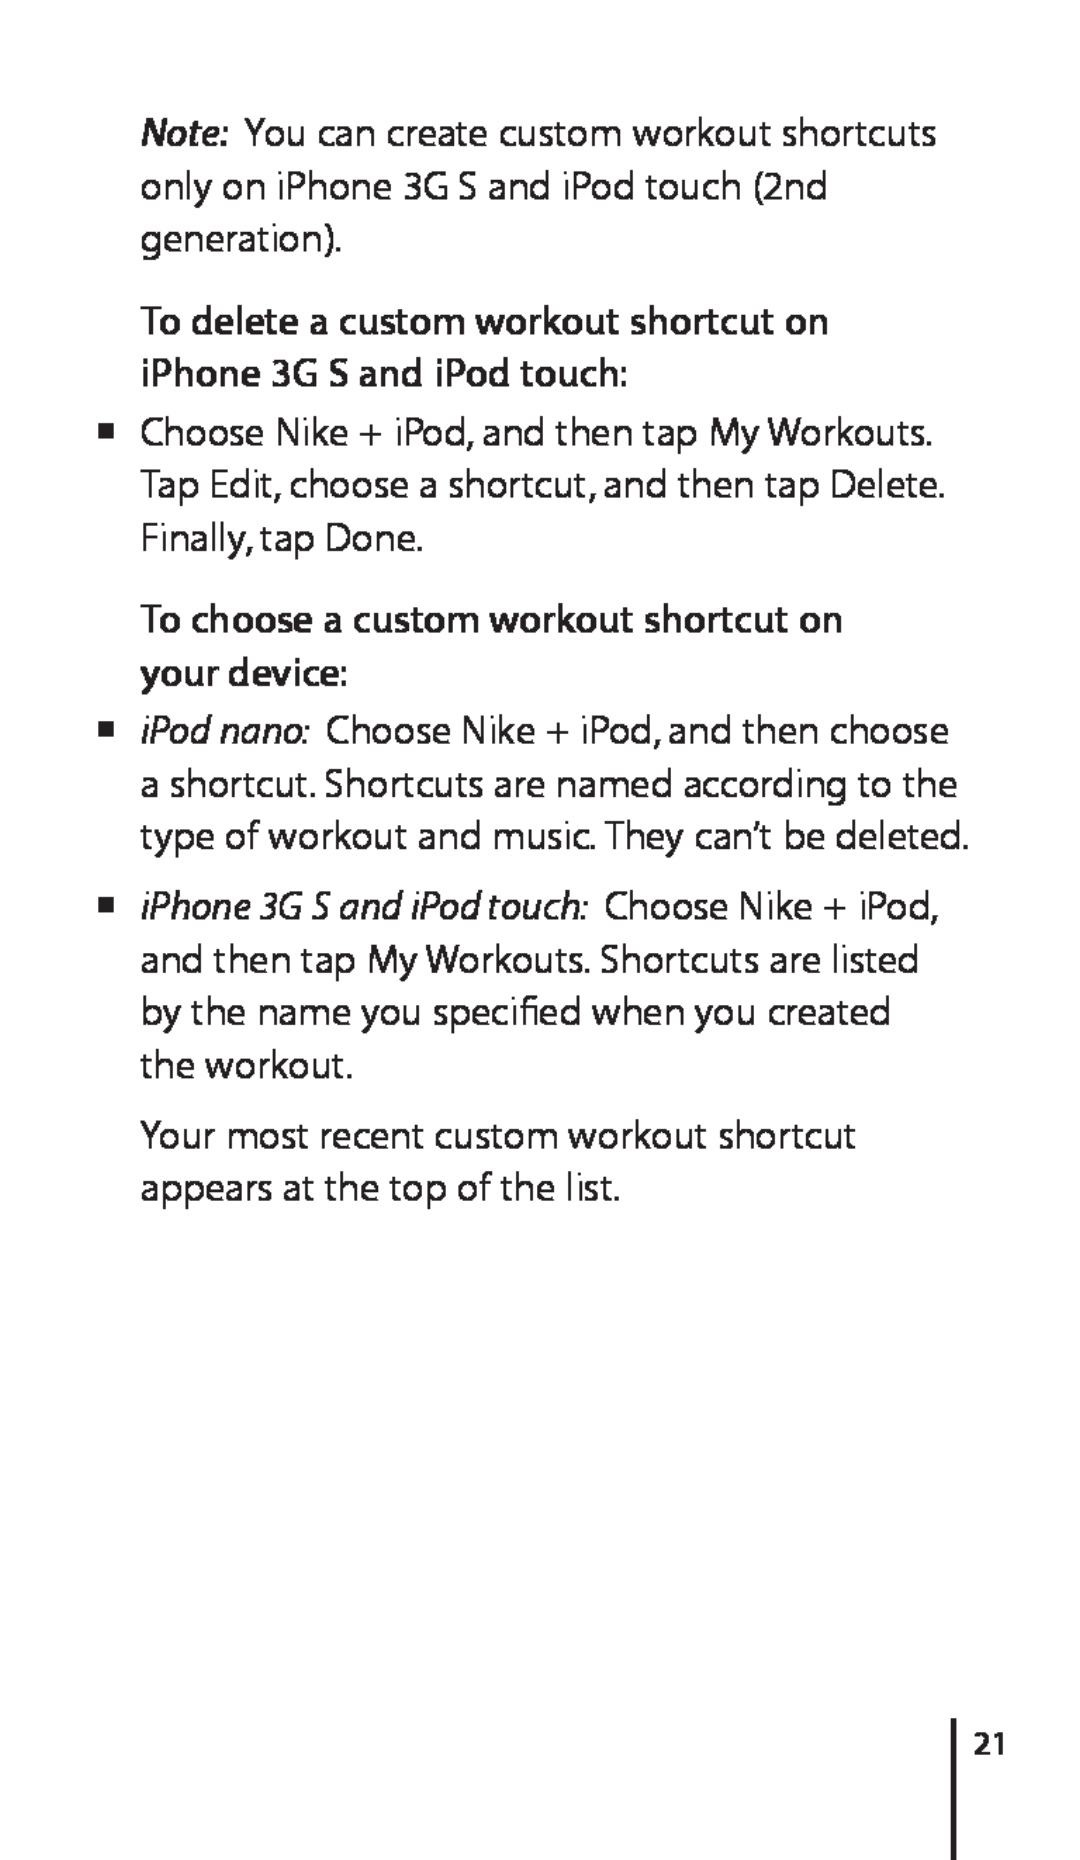 Apple 034-4945-A, Nike + iPod Sensor manual To delete a custom workout shortcut on iPhone 3G S and iPod touch 